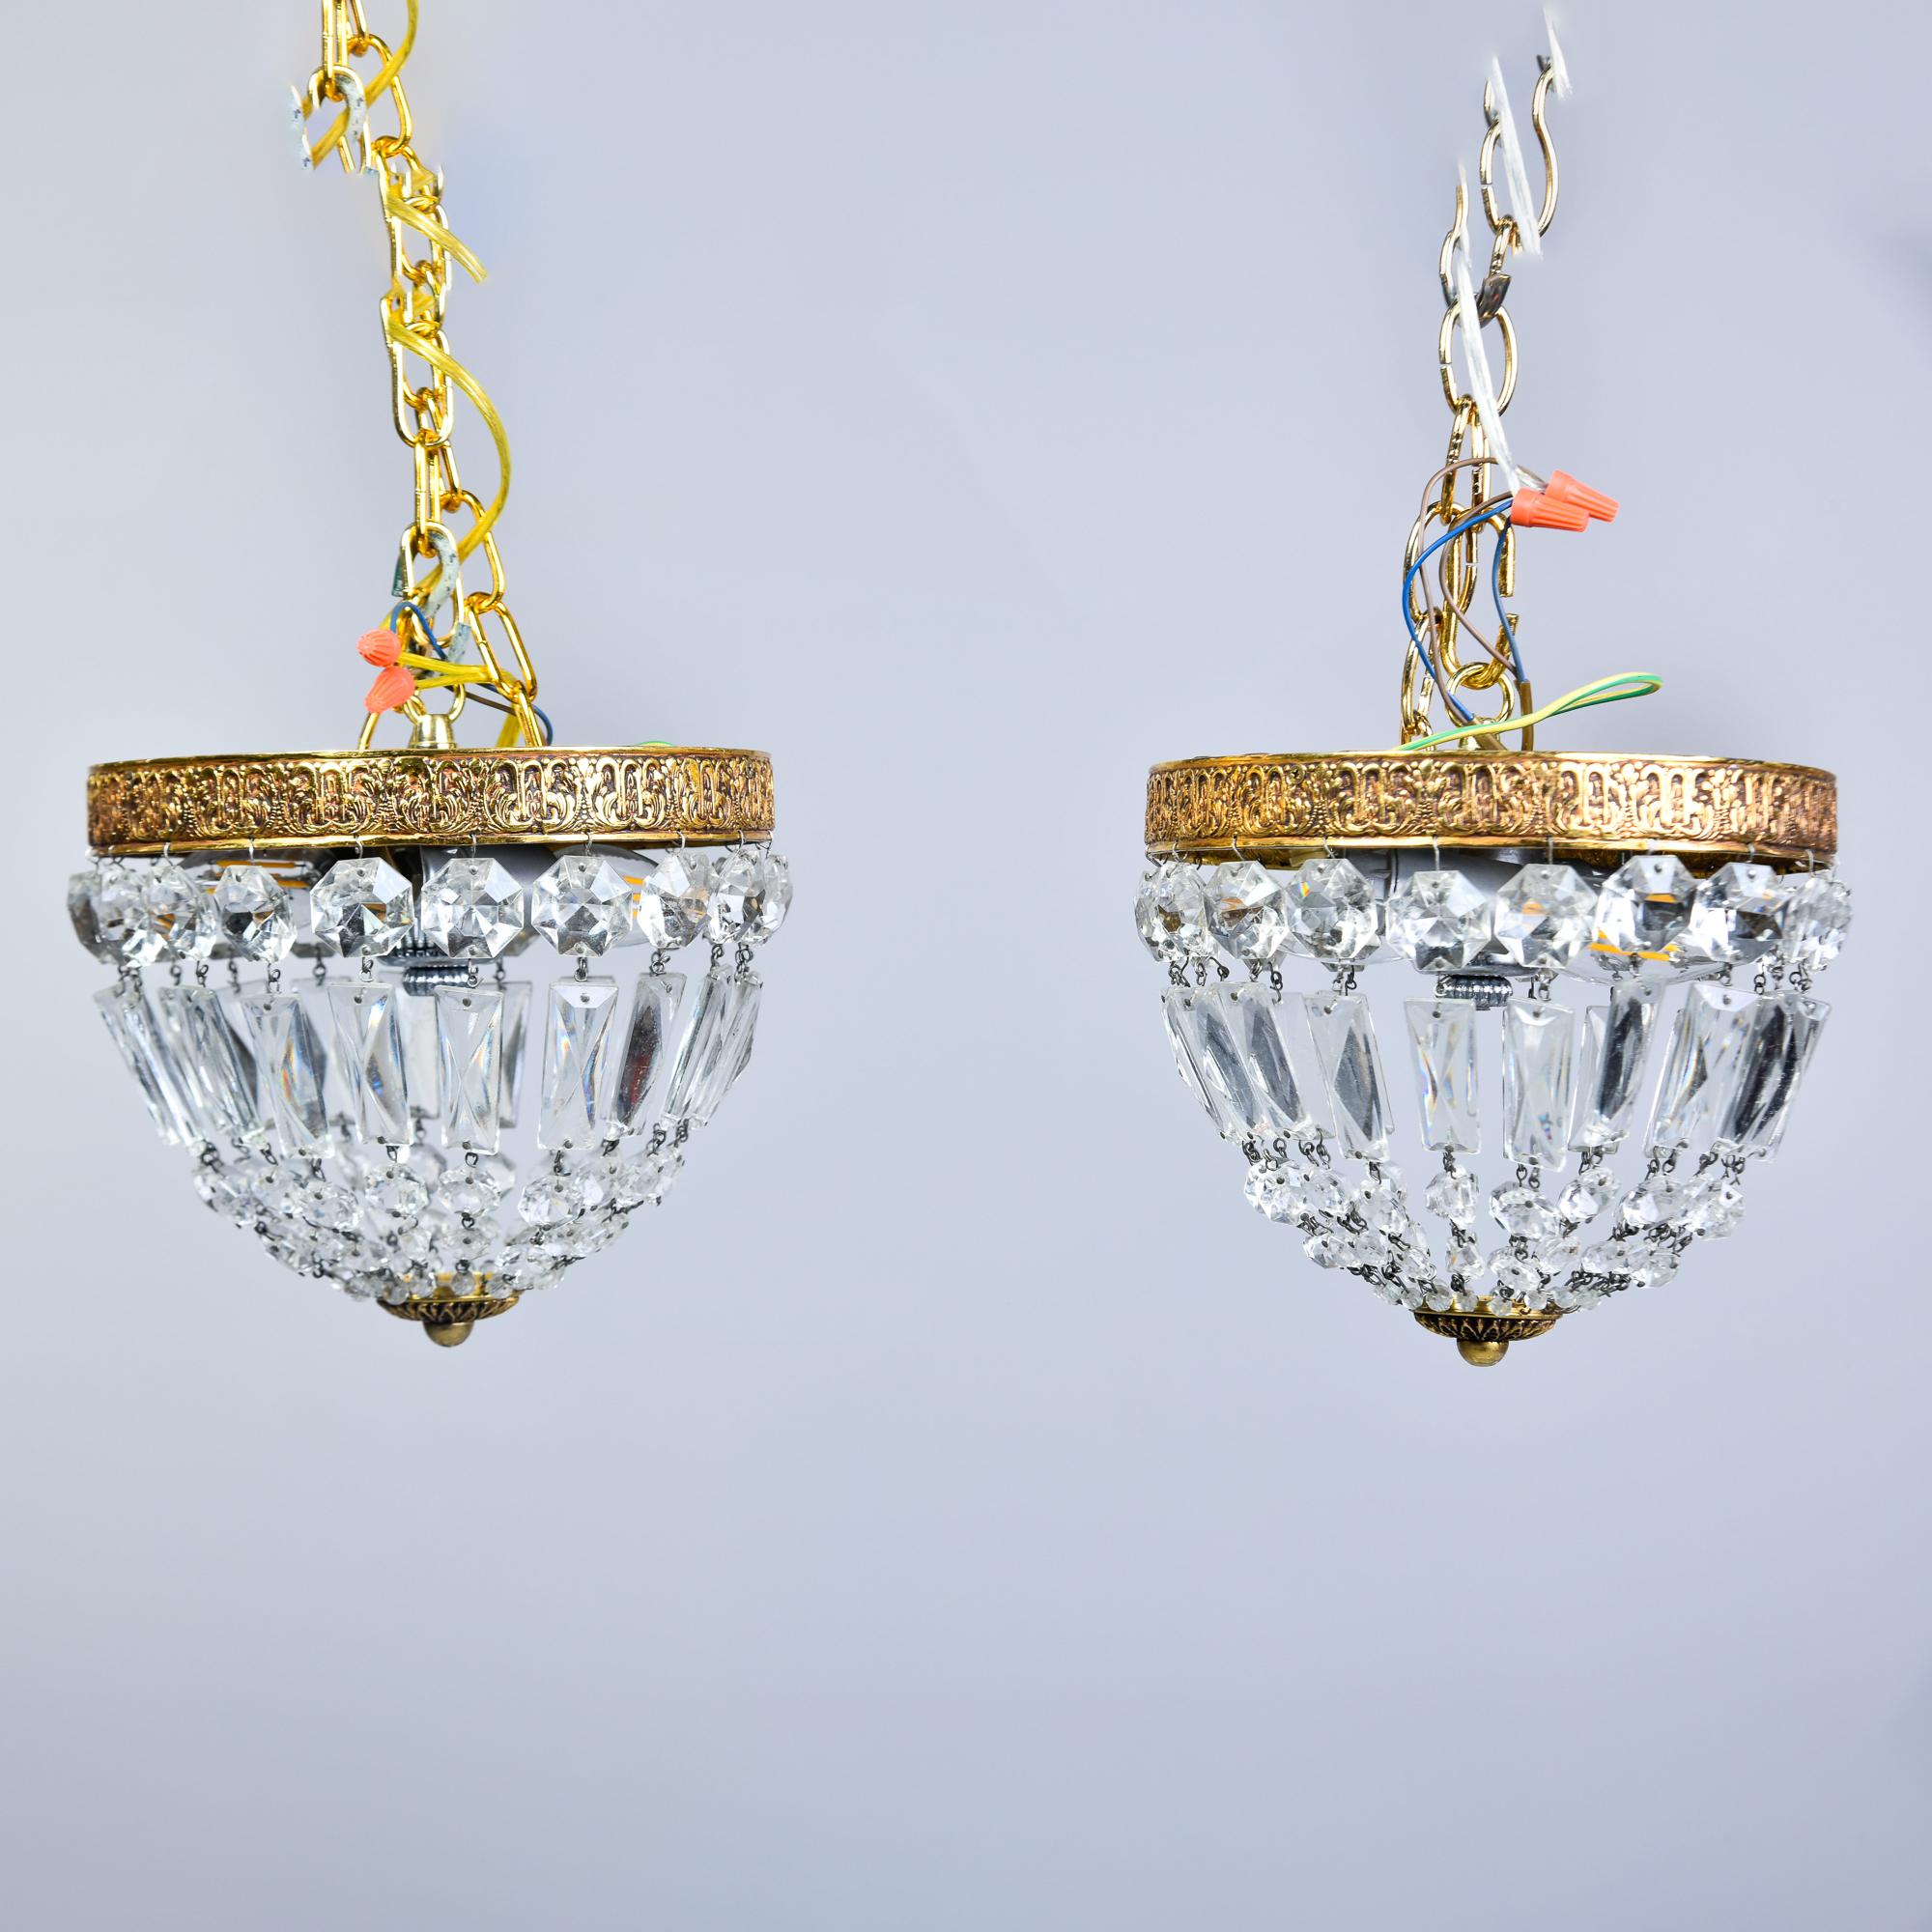 Found in Italy, this pair of small crystal and brass ceiling fixtures date from the 1940s. Stamped brass frames support crystals strung in a basket form with two internal light sockets. Perfect petite fixtures for a powder room, alcove or hallway.